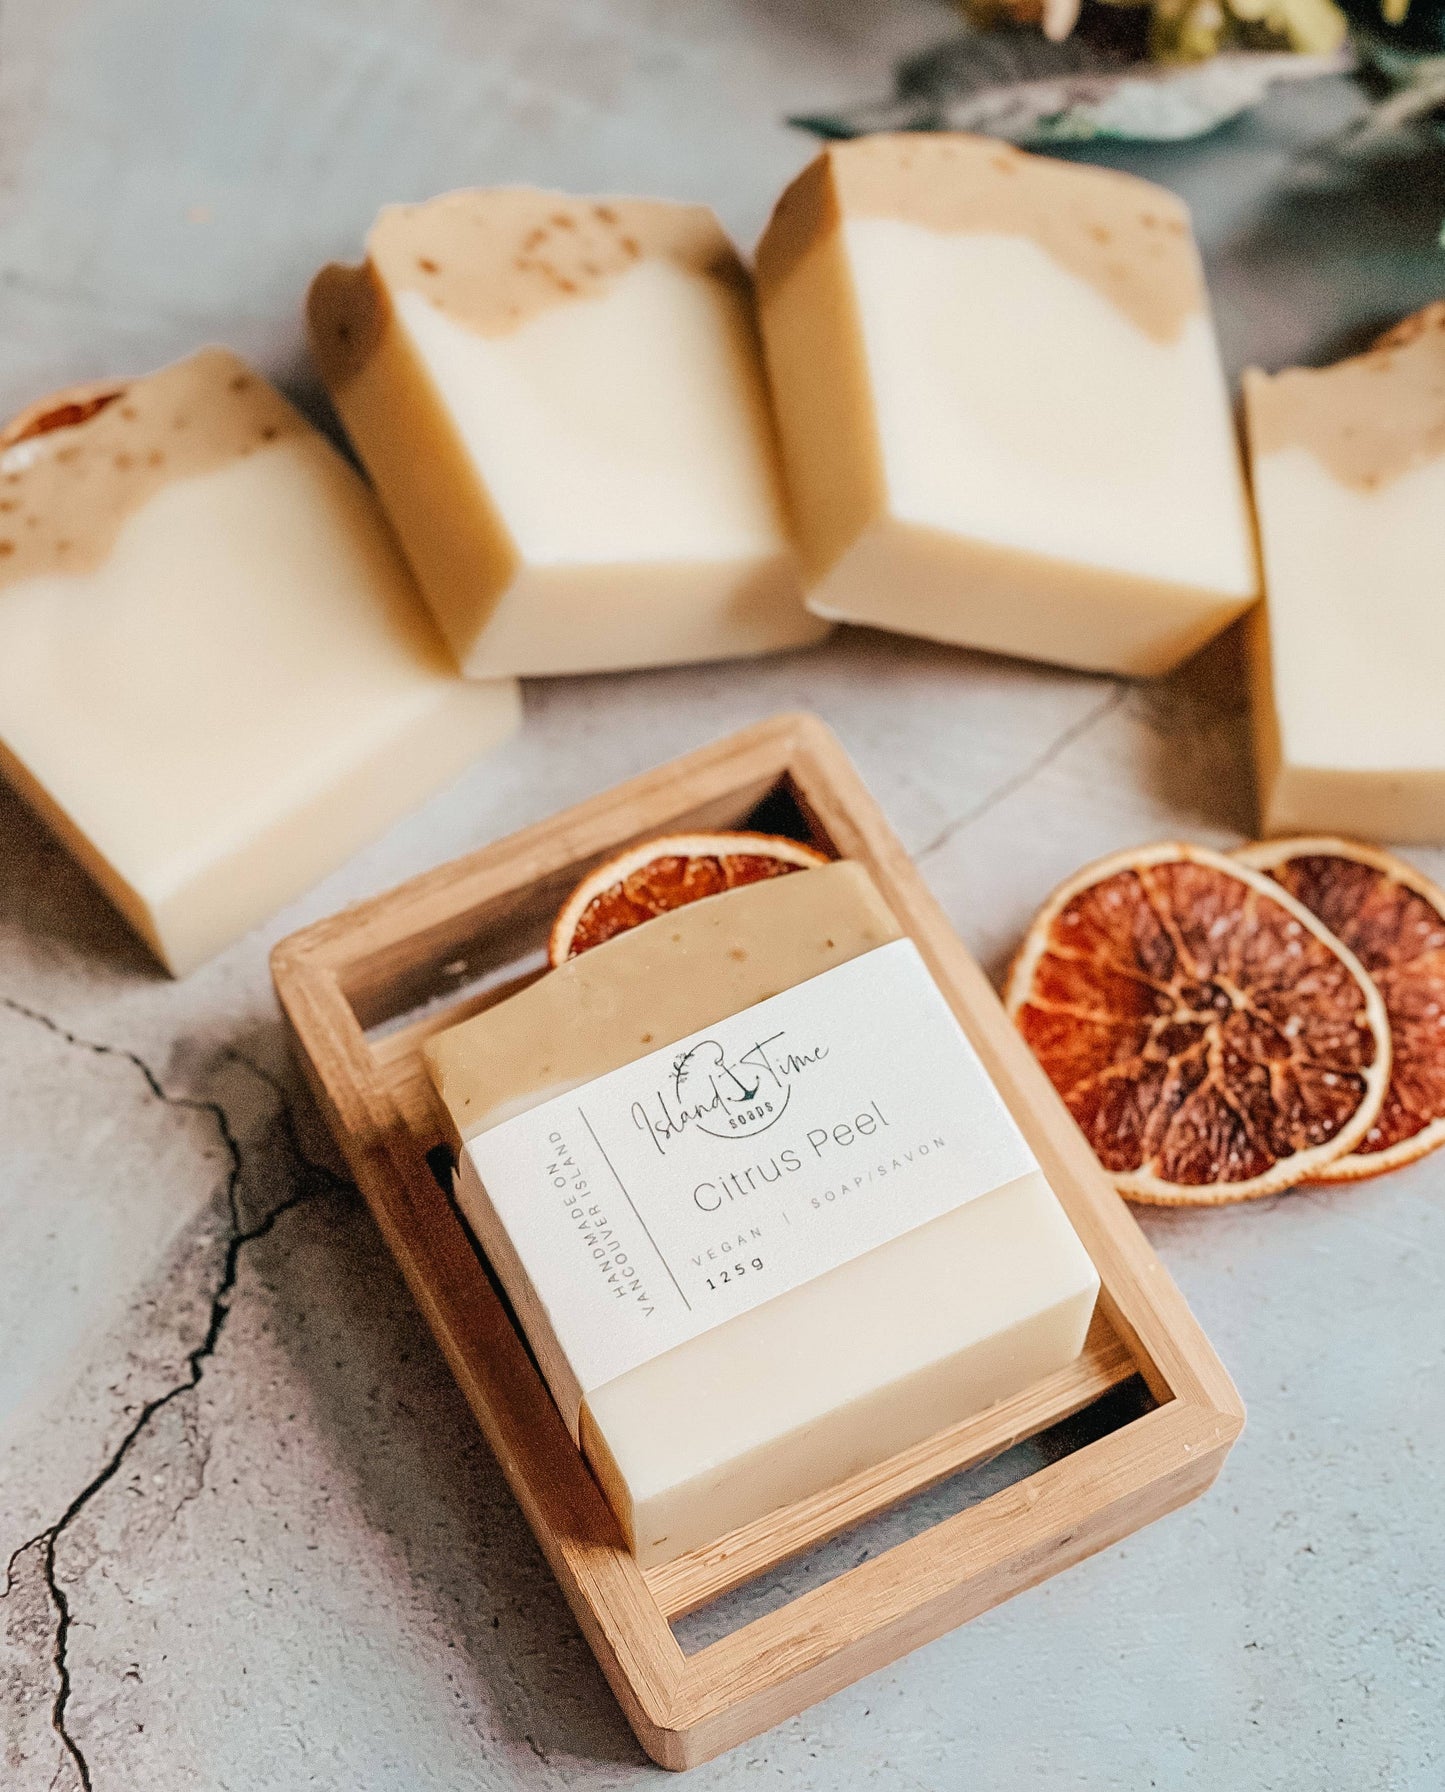 Island Time Soap + Candle - All Natural Citrus Peel Handmade Artisan Soap